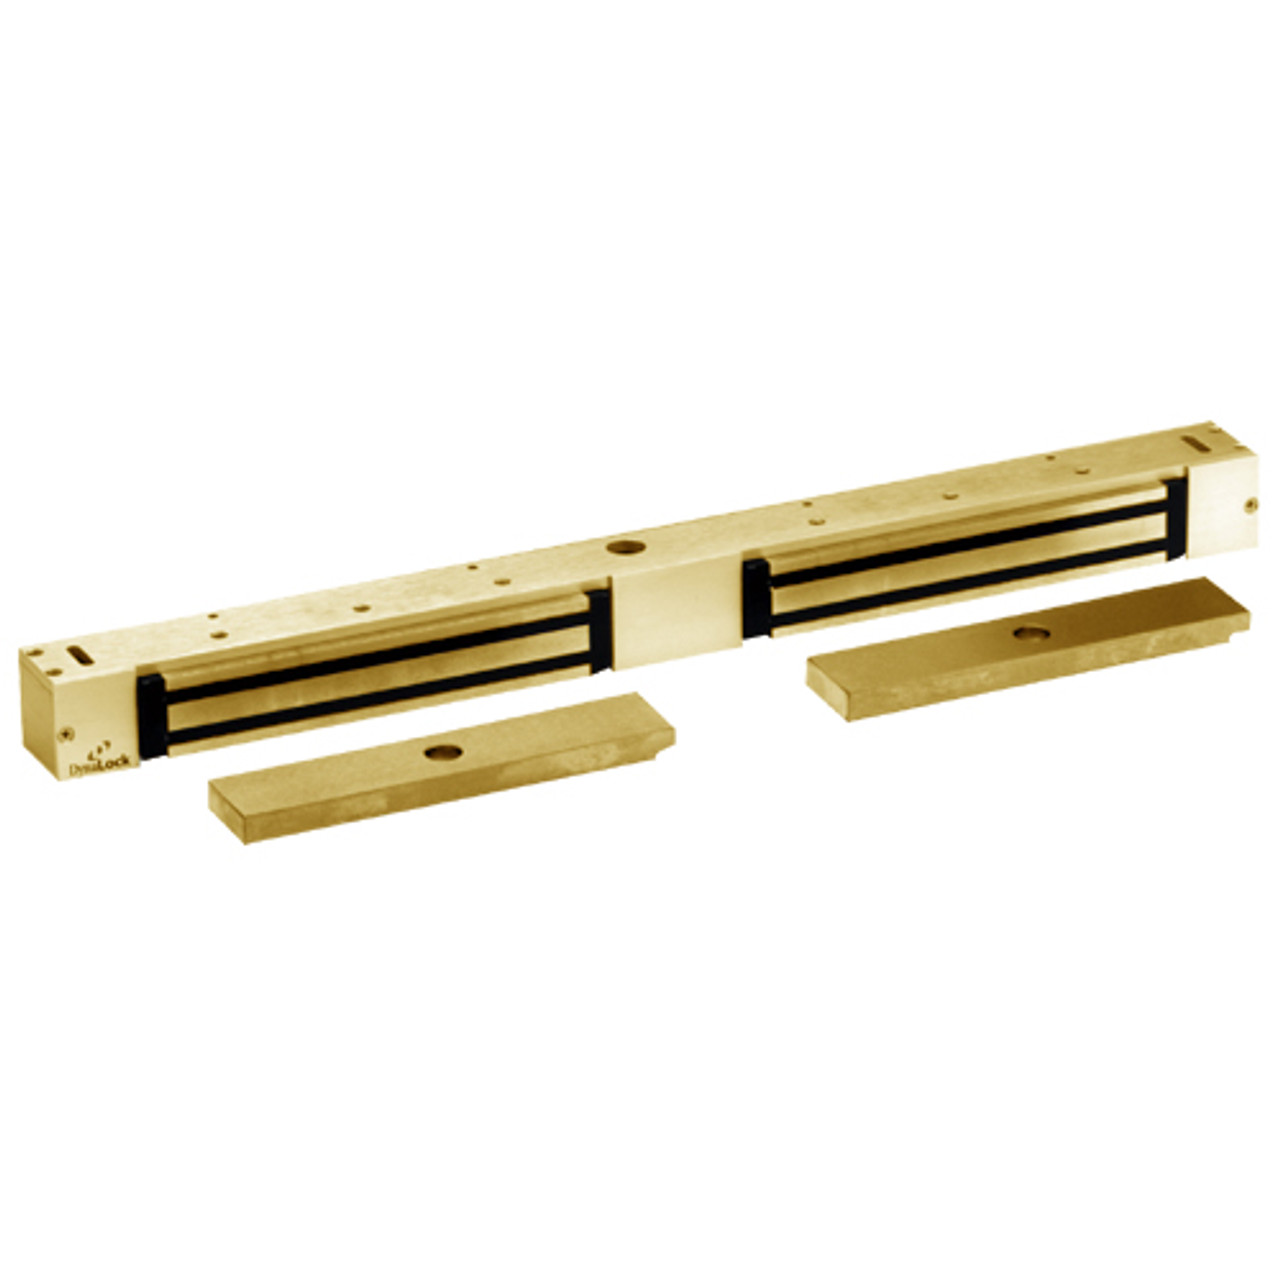 2268-20-US3-DYN2 DynaLock 2268 Series Double Classic Low Profile Electromagnetic Lock for Outswing Door with DYN in Bright Brass